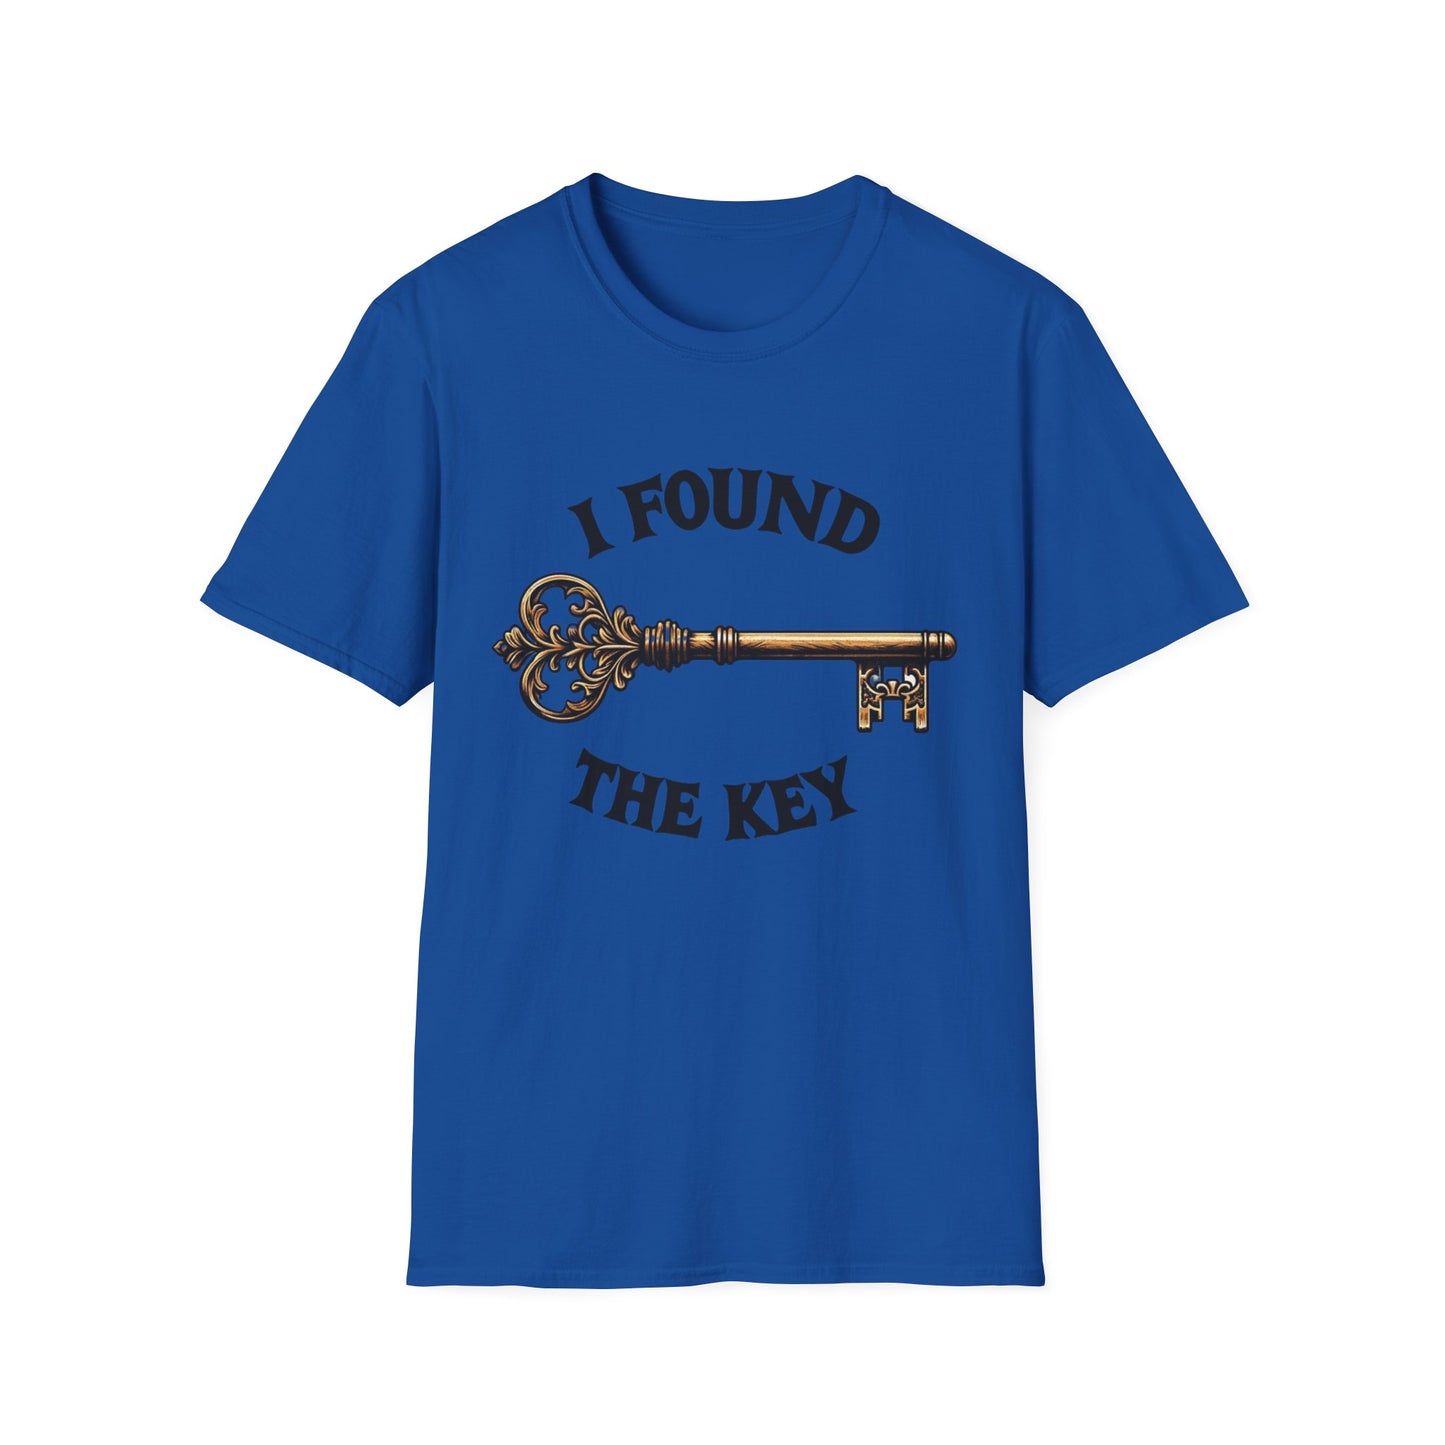 I Found The Key | Deluxe Unisex Tee colors